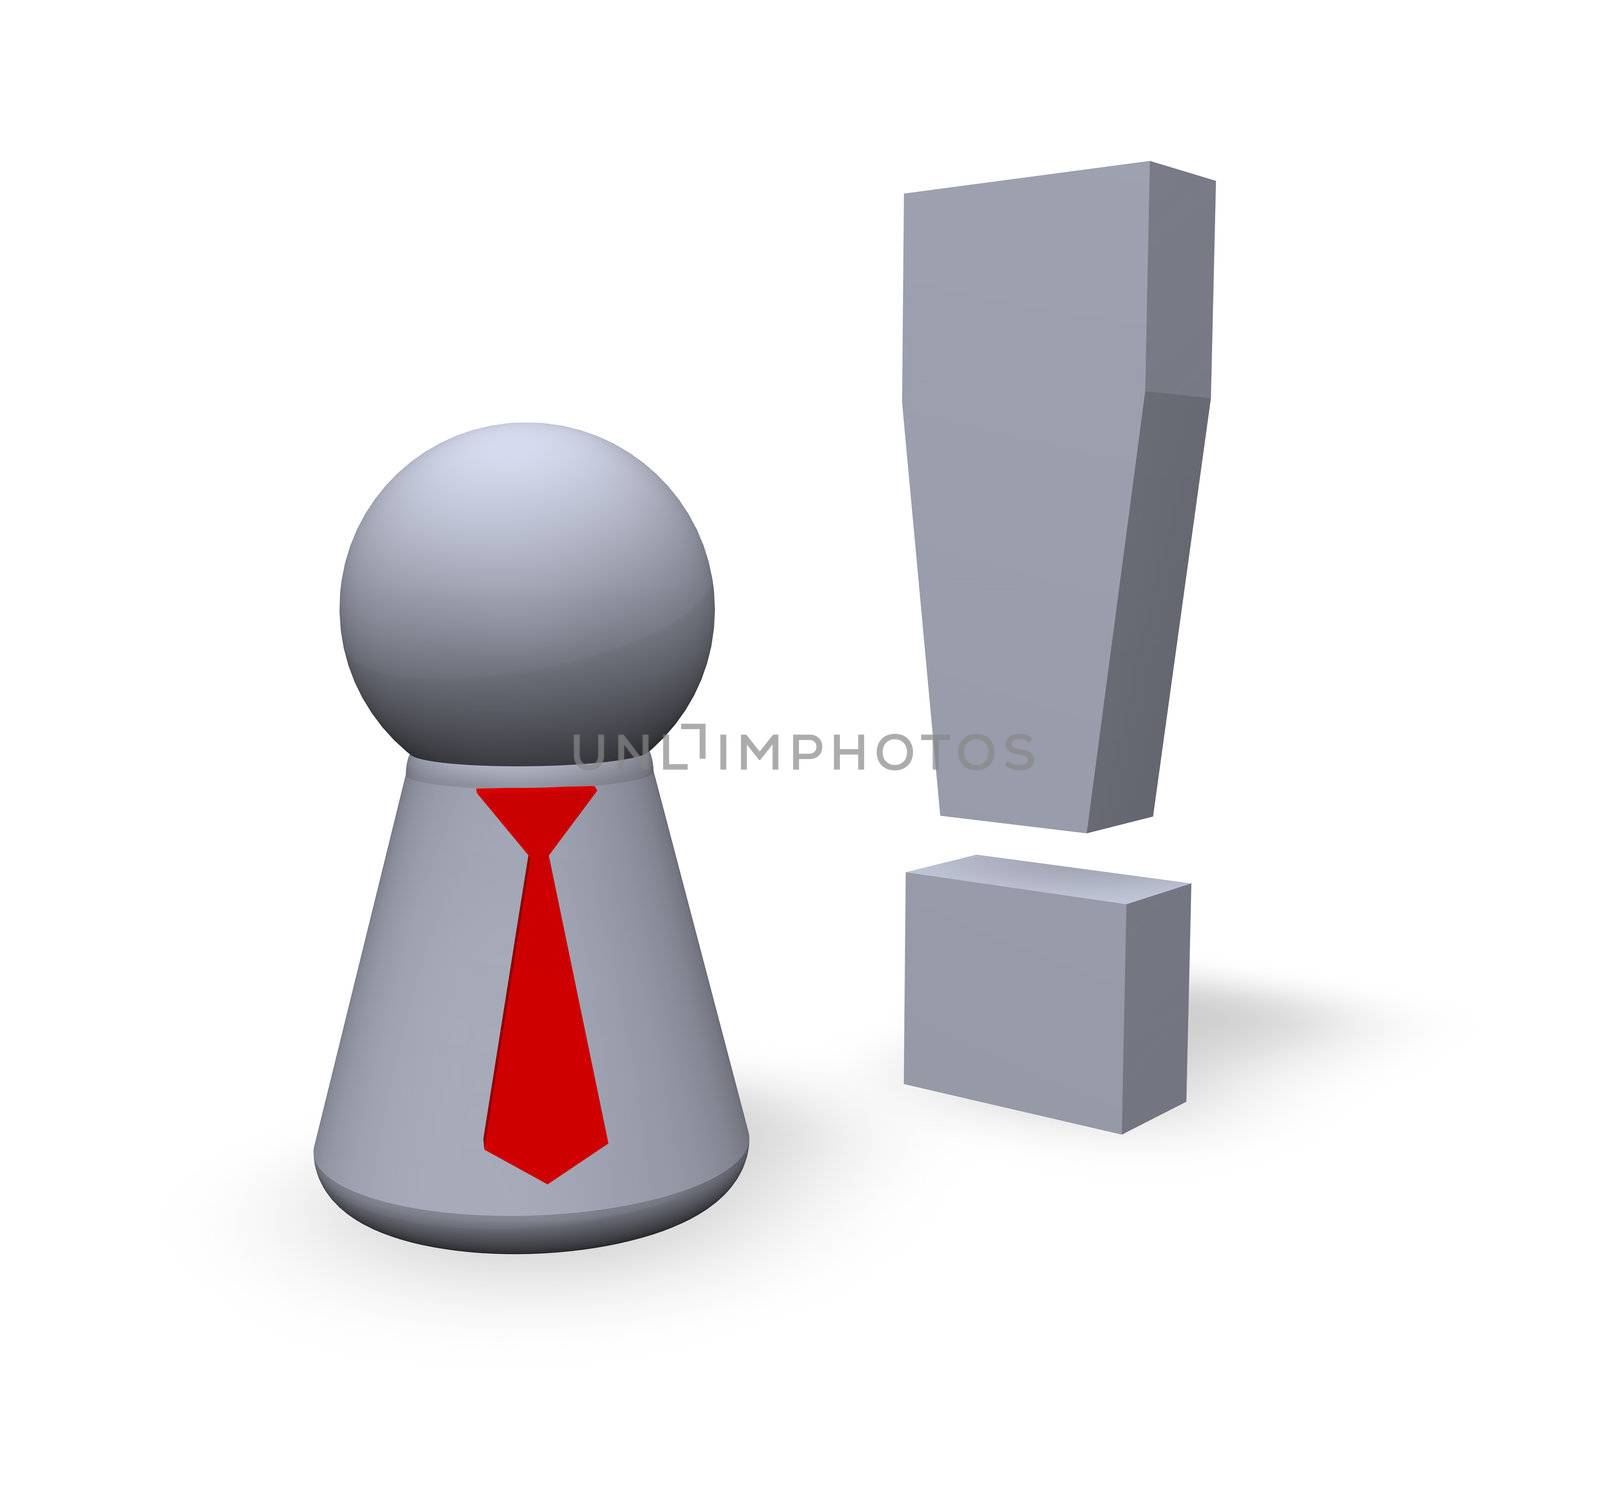 attention symbol in 3d and play figure with red tie